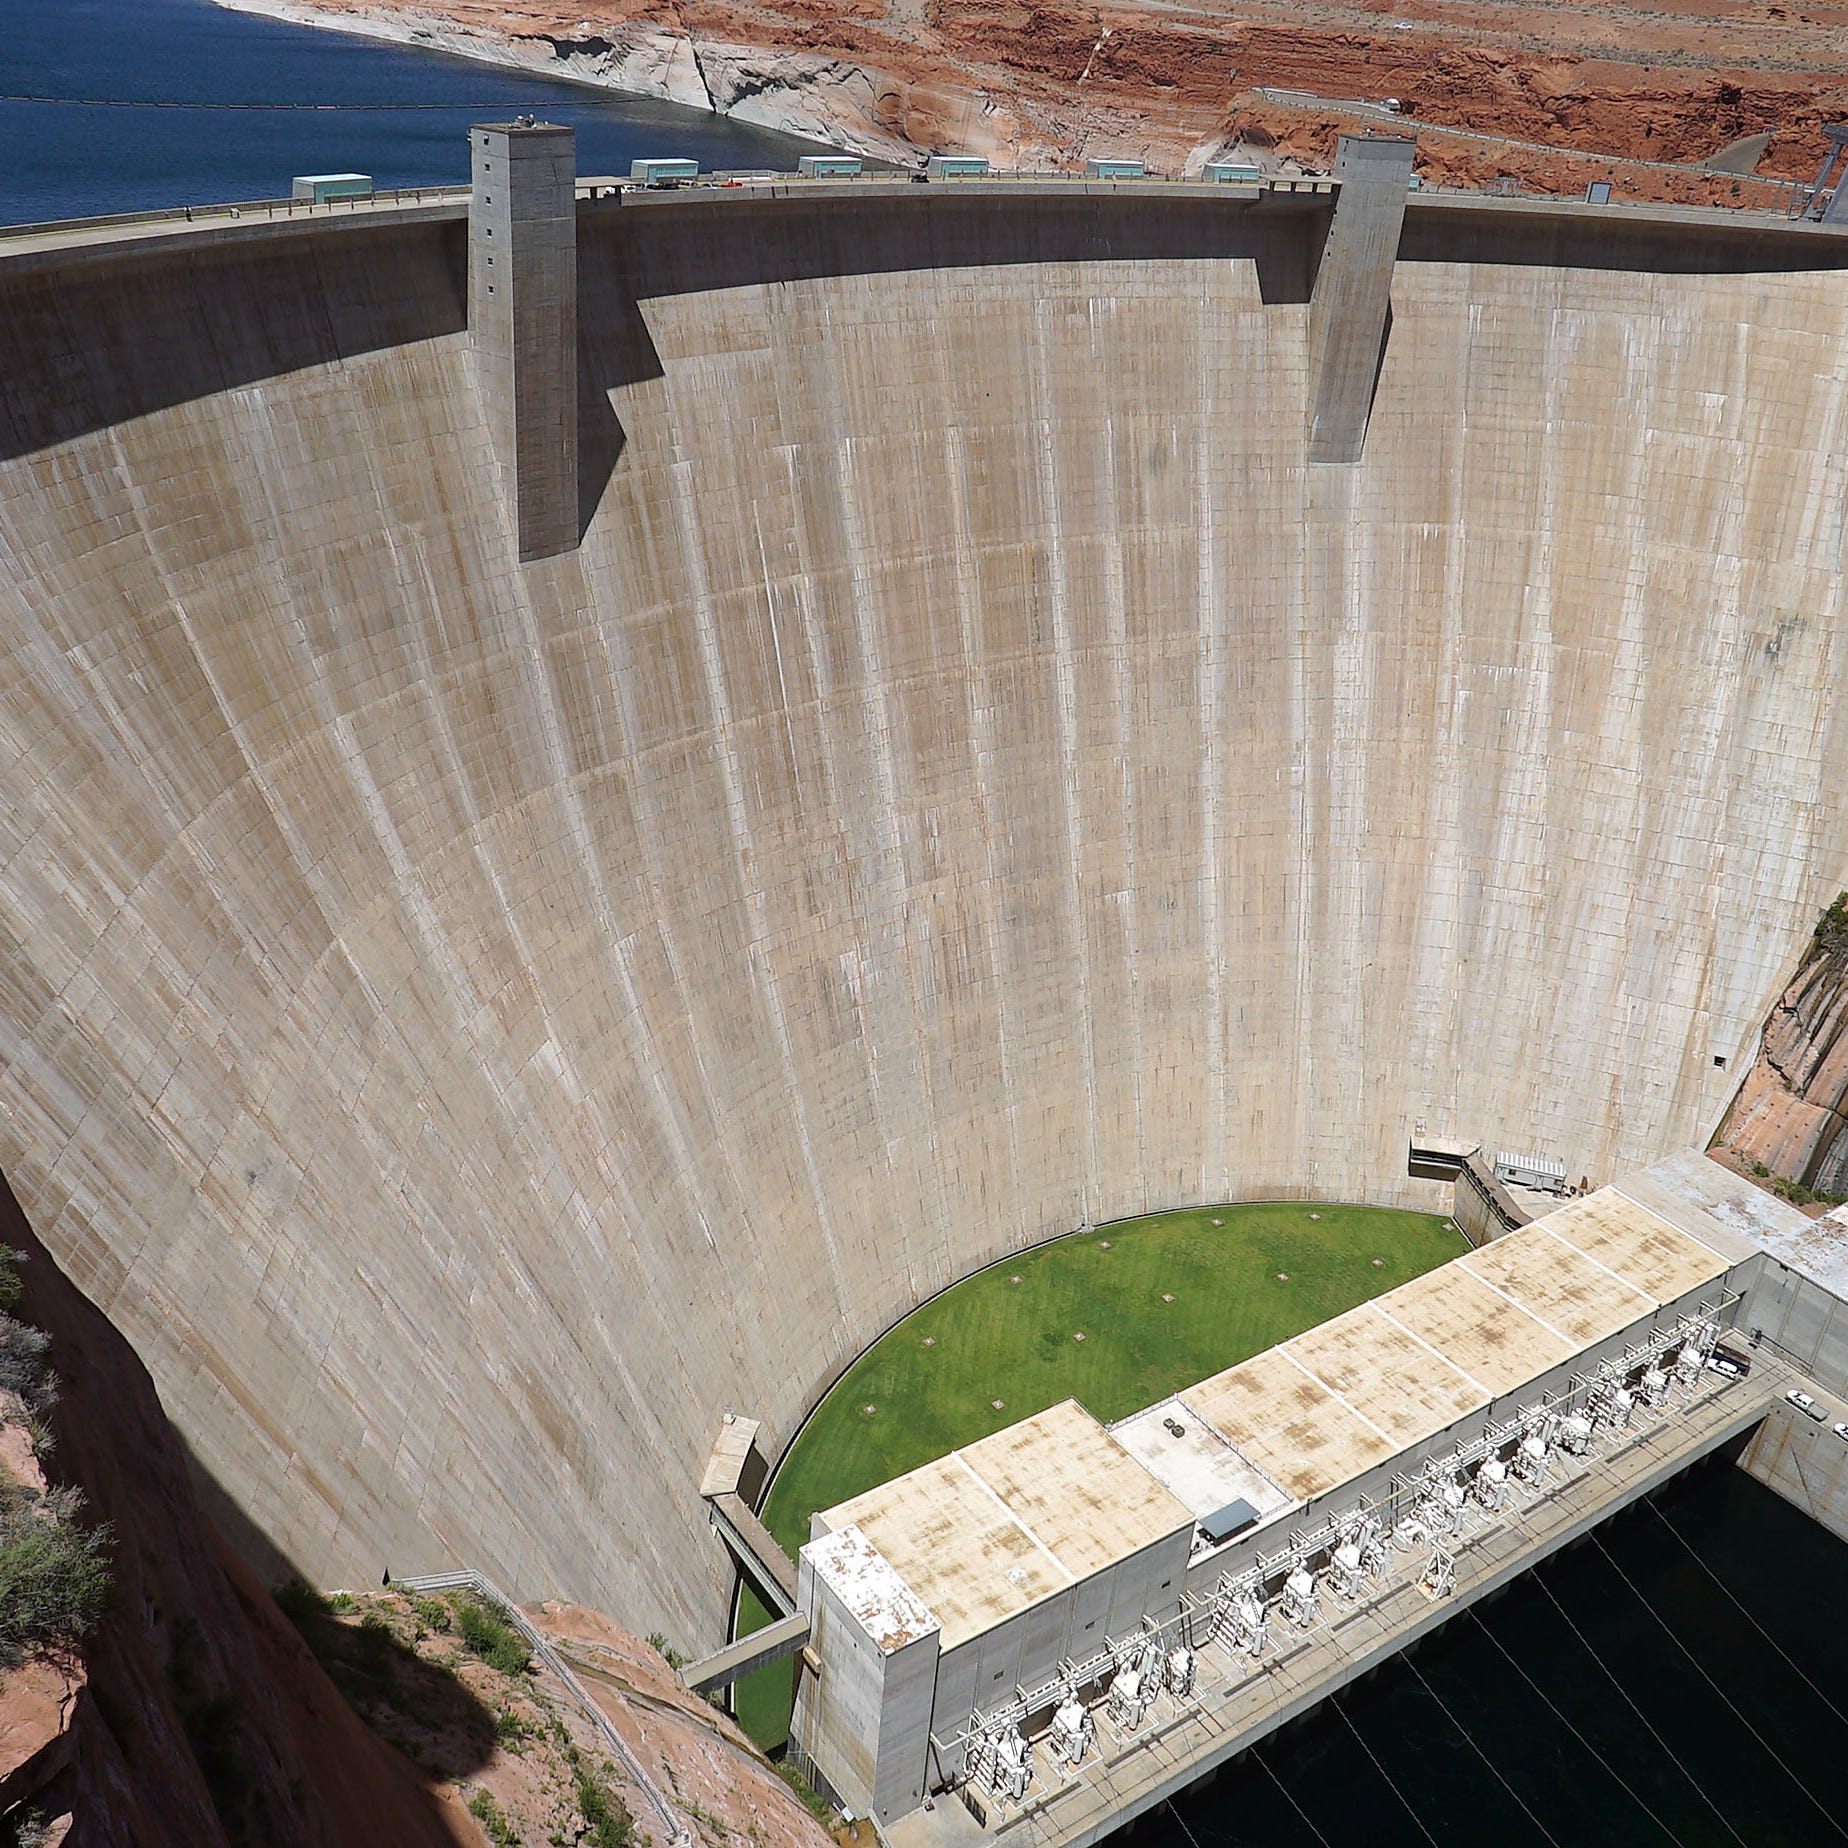 The Glen Canyon Dam, which impounds the Colorado River to create Lake Powell, was originally designed to be 16 feet higher, making it the same height at the Hoover Dam on Lake Meade in Nevada. Engineers shortened the dam, lowering the reservoir's height, to protect Rainbow Bridge, North America's largest natural rock bridge, which is about 50 miles north of the dam.      